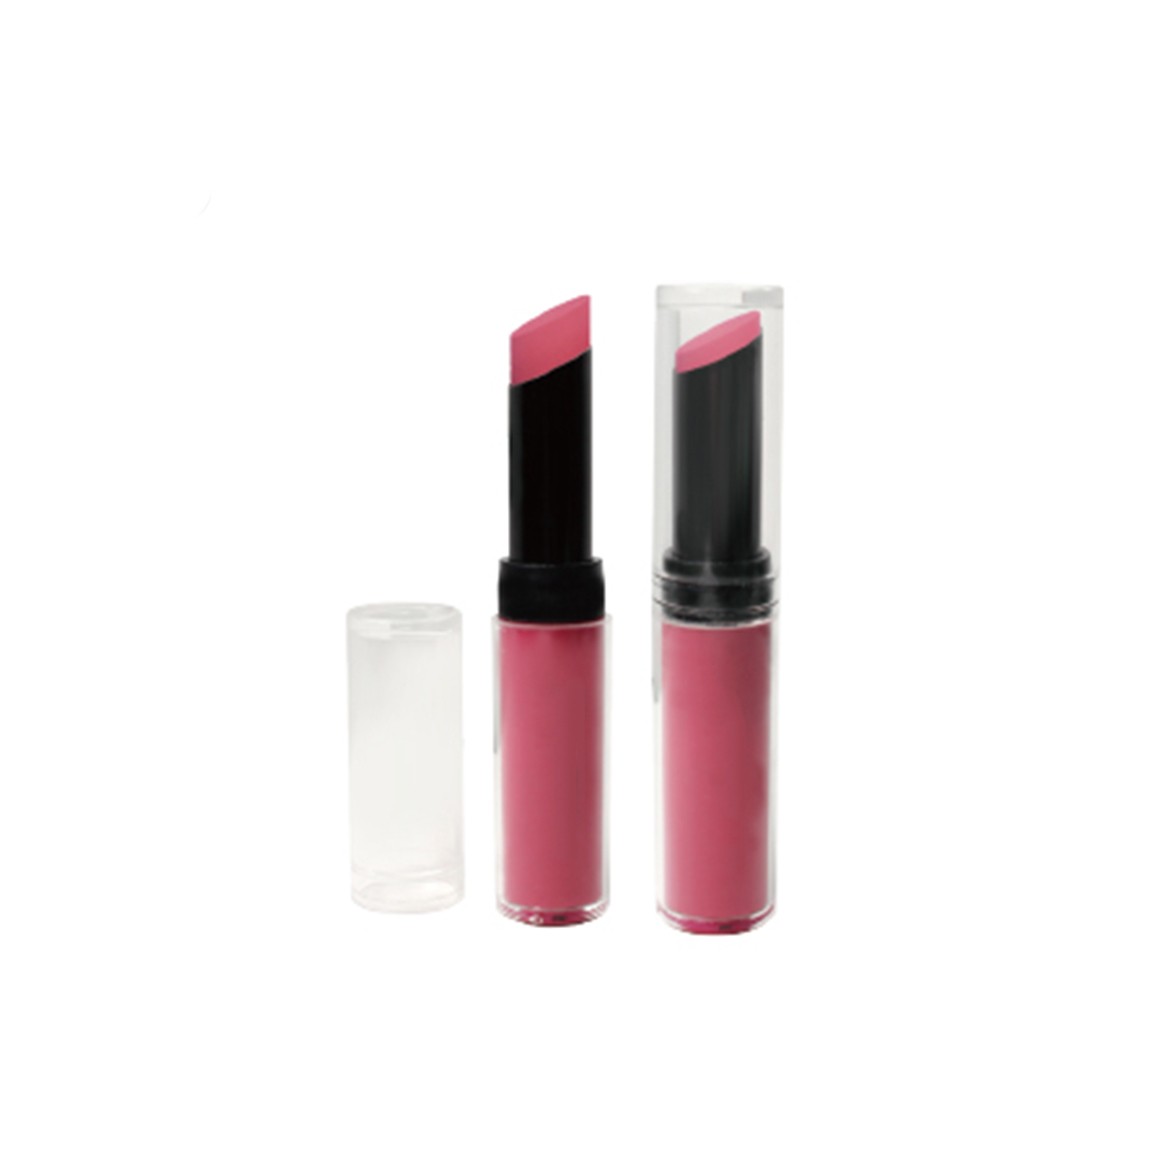 Cosmetic lip tube case packaging twist up cap on easy handy tube refill BPA free transparent and pink color